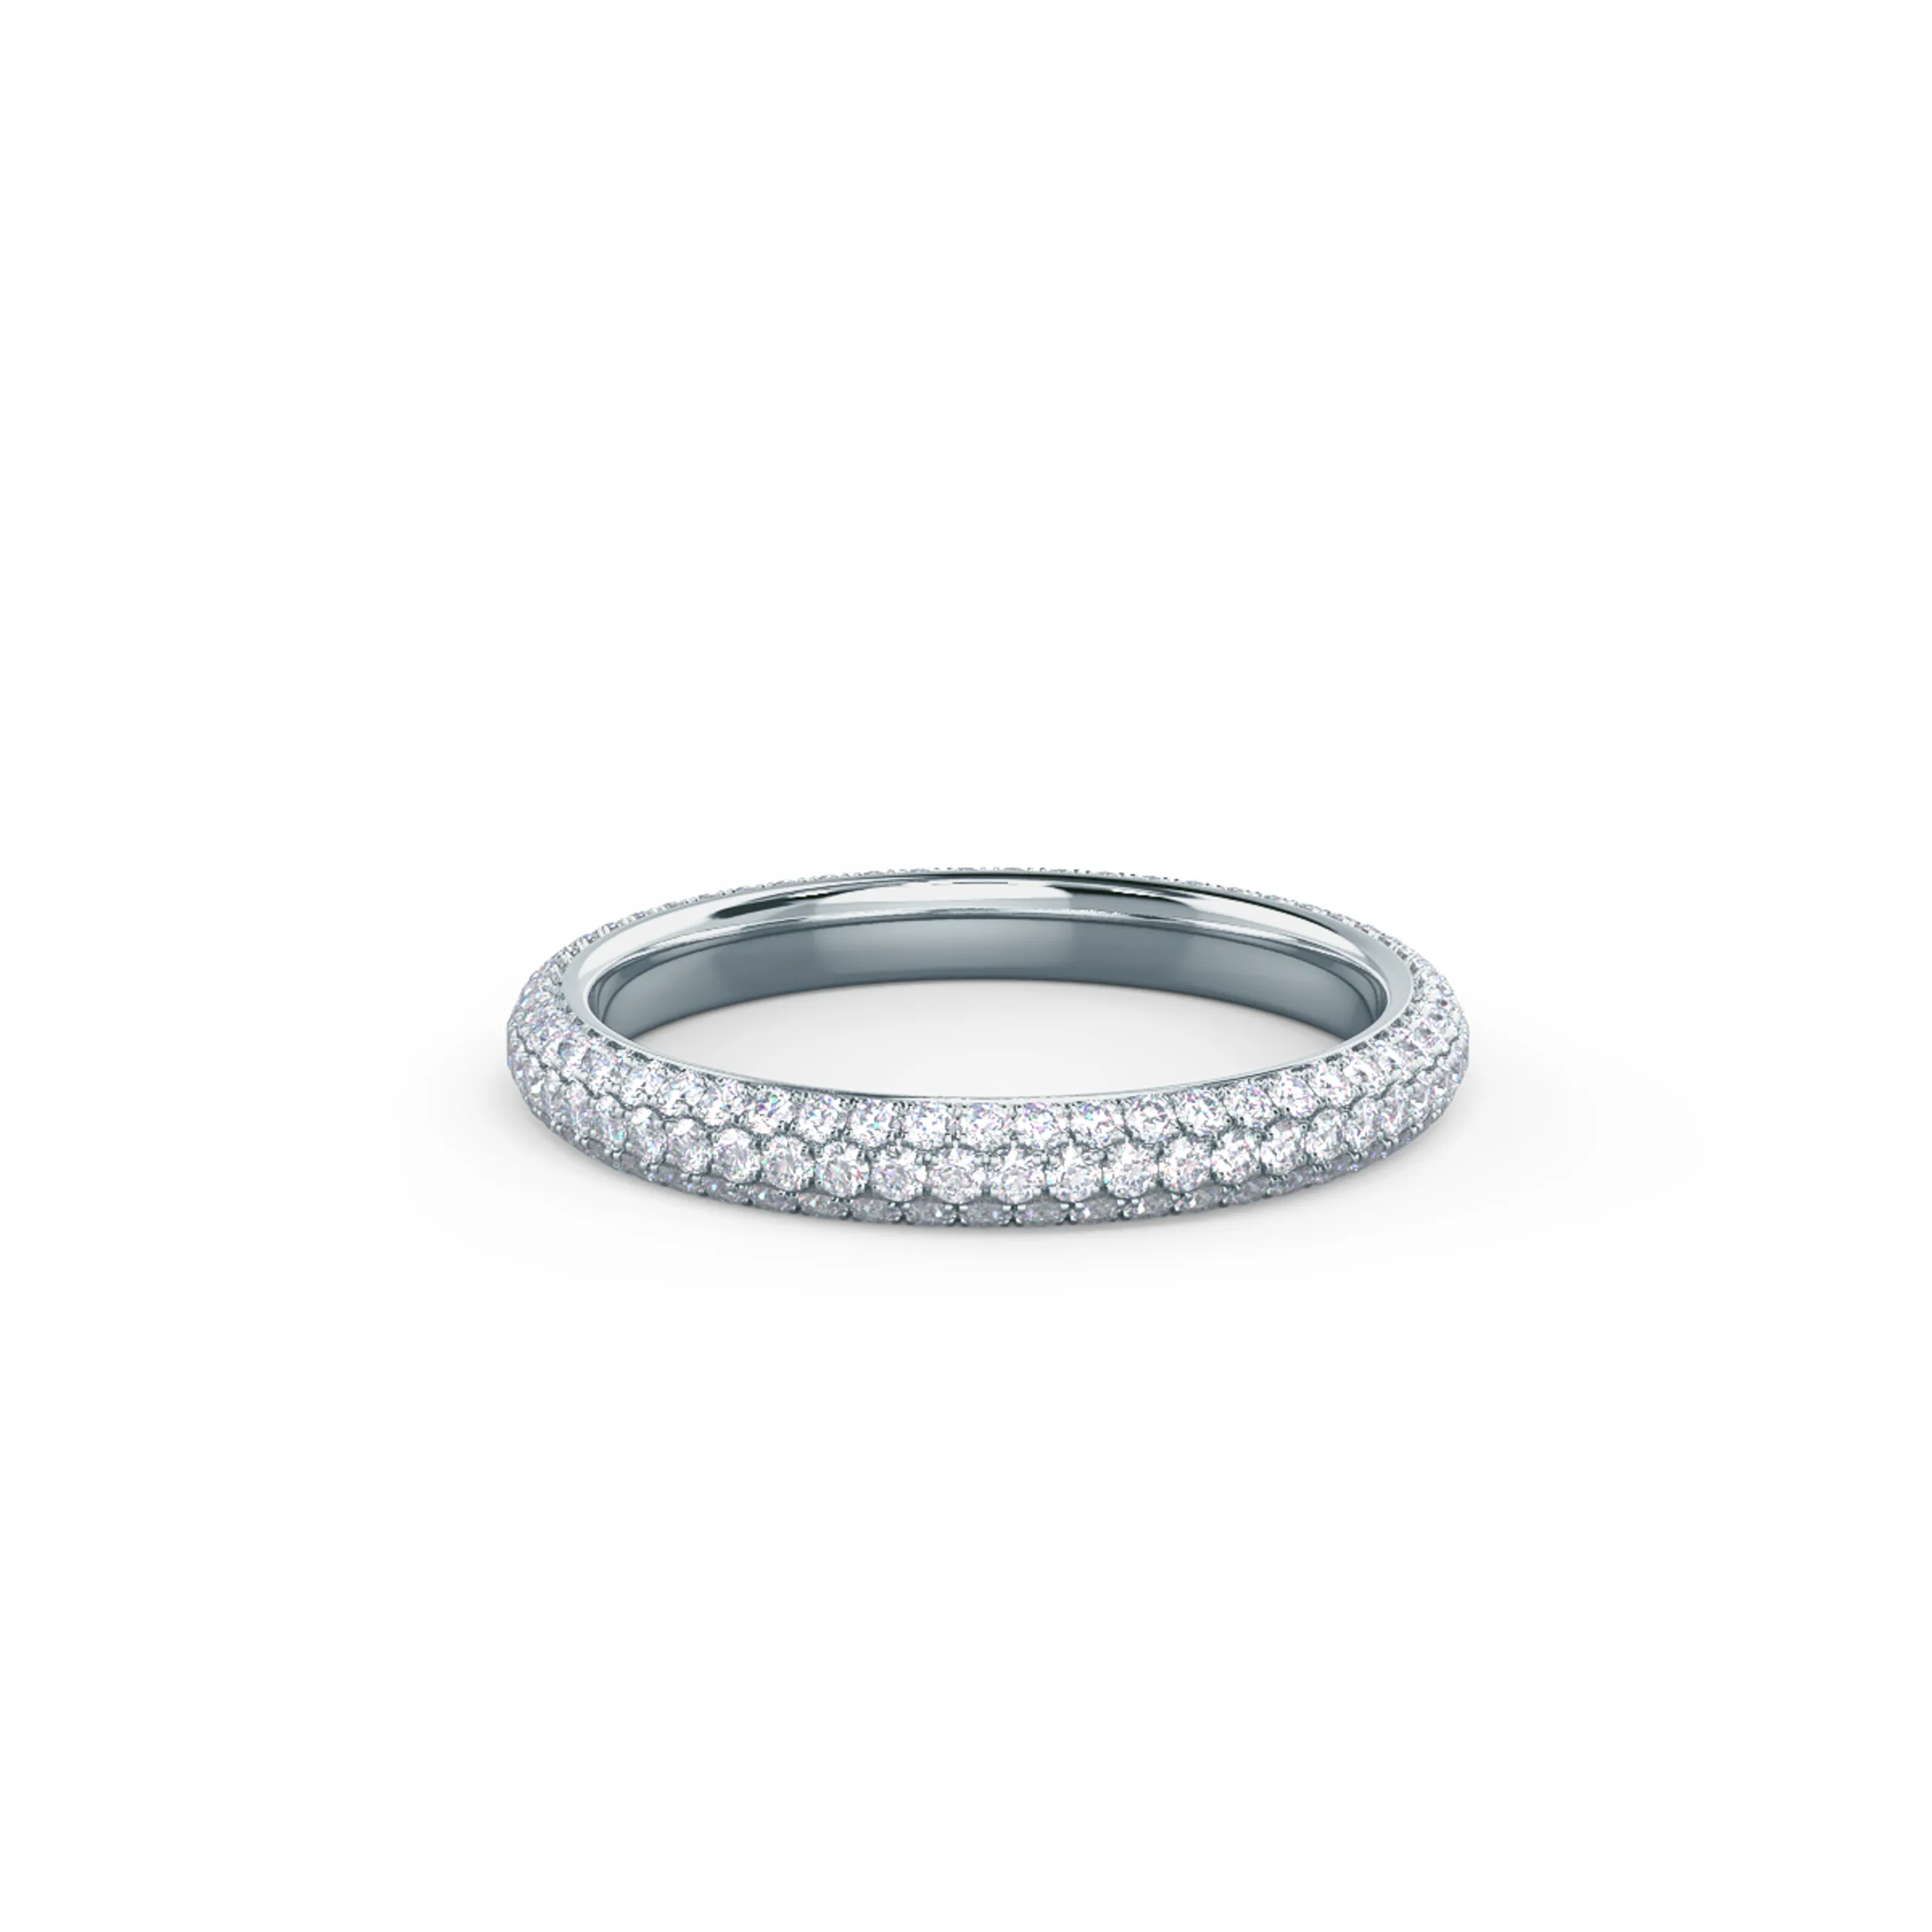 Exceptional Quality 0.8 Carat Round Brilliant Lab Created Diamonds set in 18k White Gold Three Sided Pavé Eternity Band (Main View)